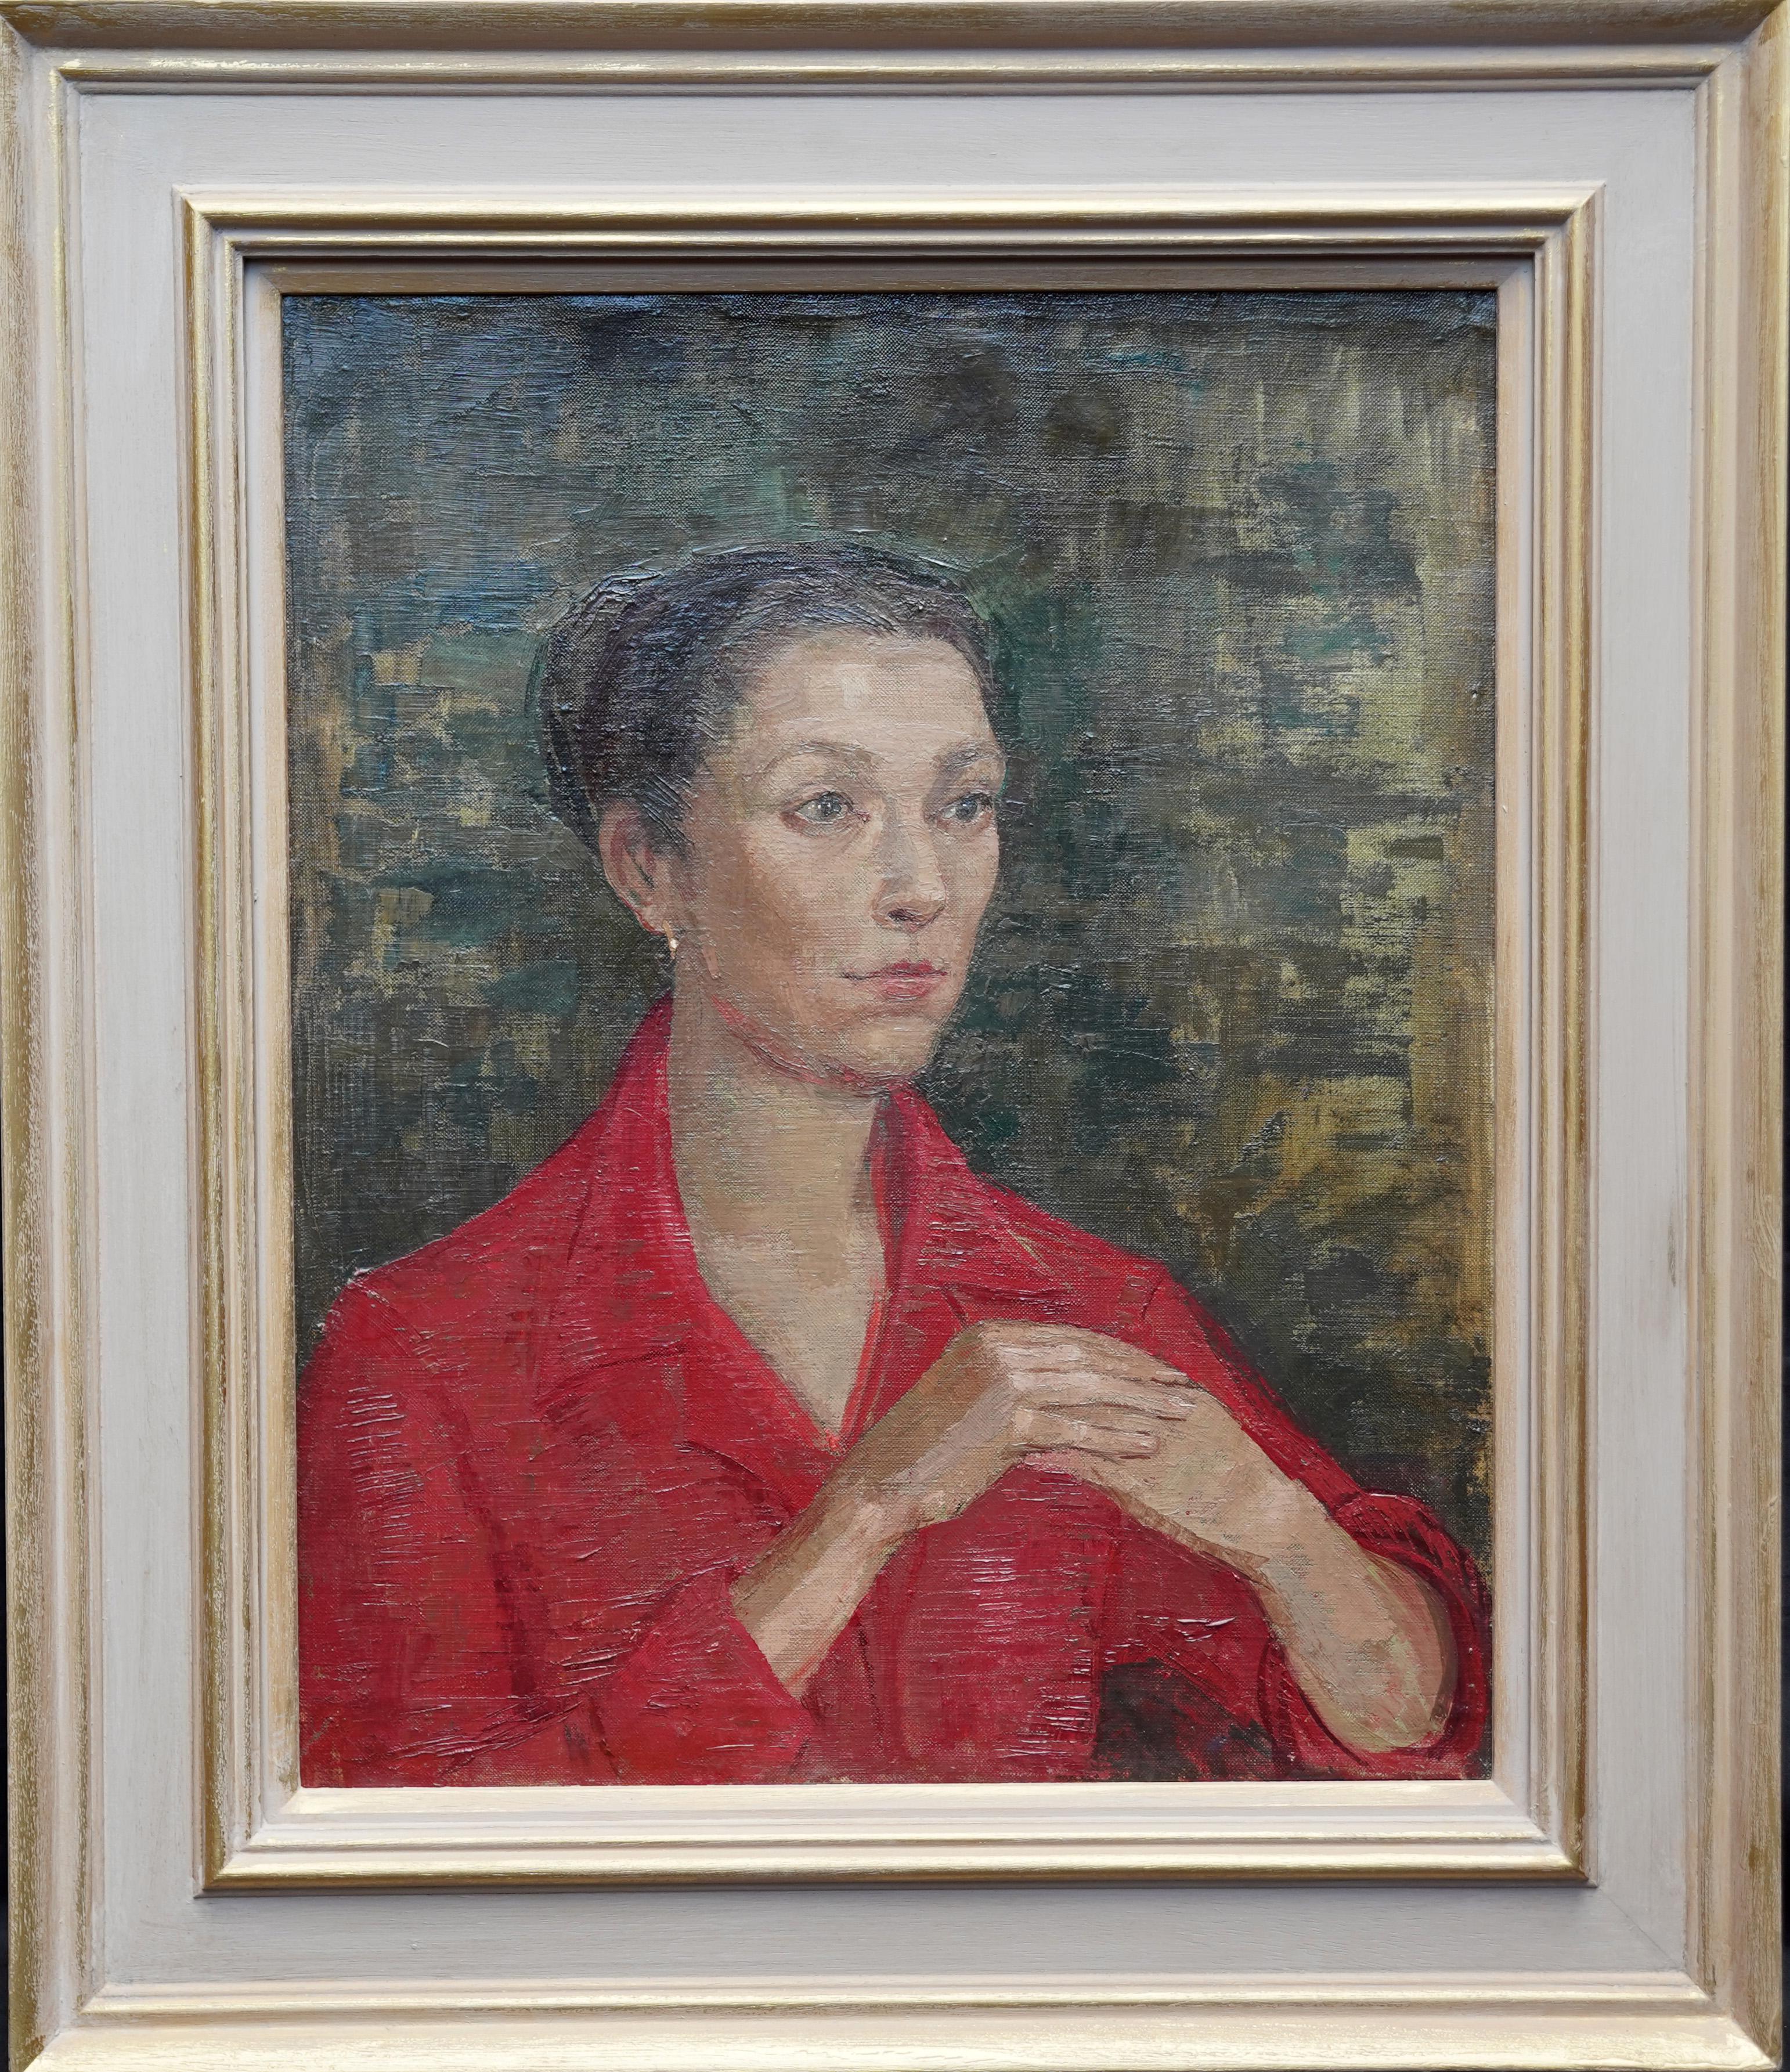 Lady in Red Portrait - British Post Impressionist 50s oil painting female artist